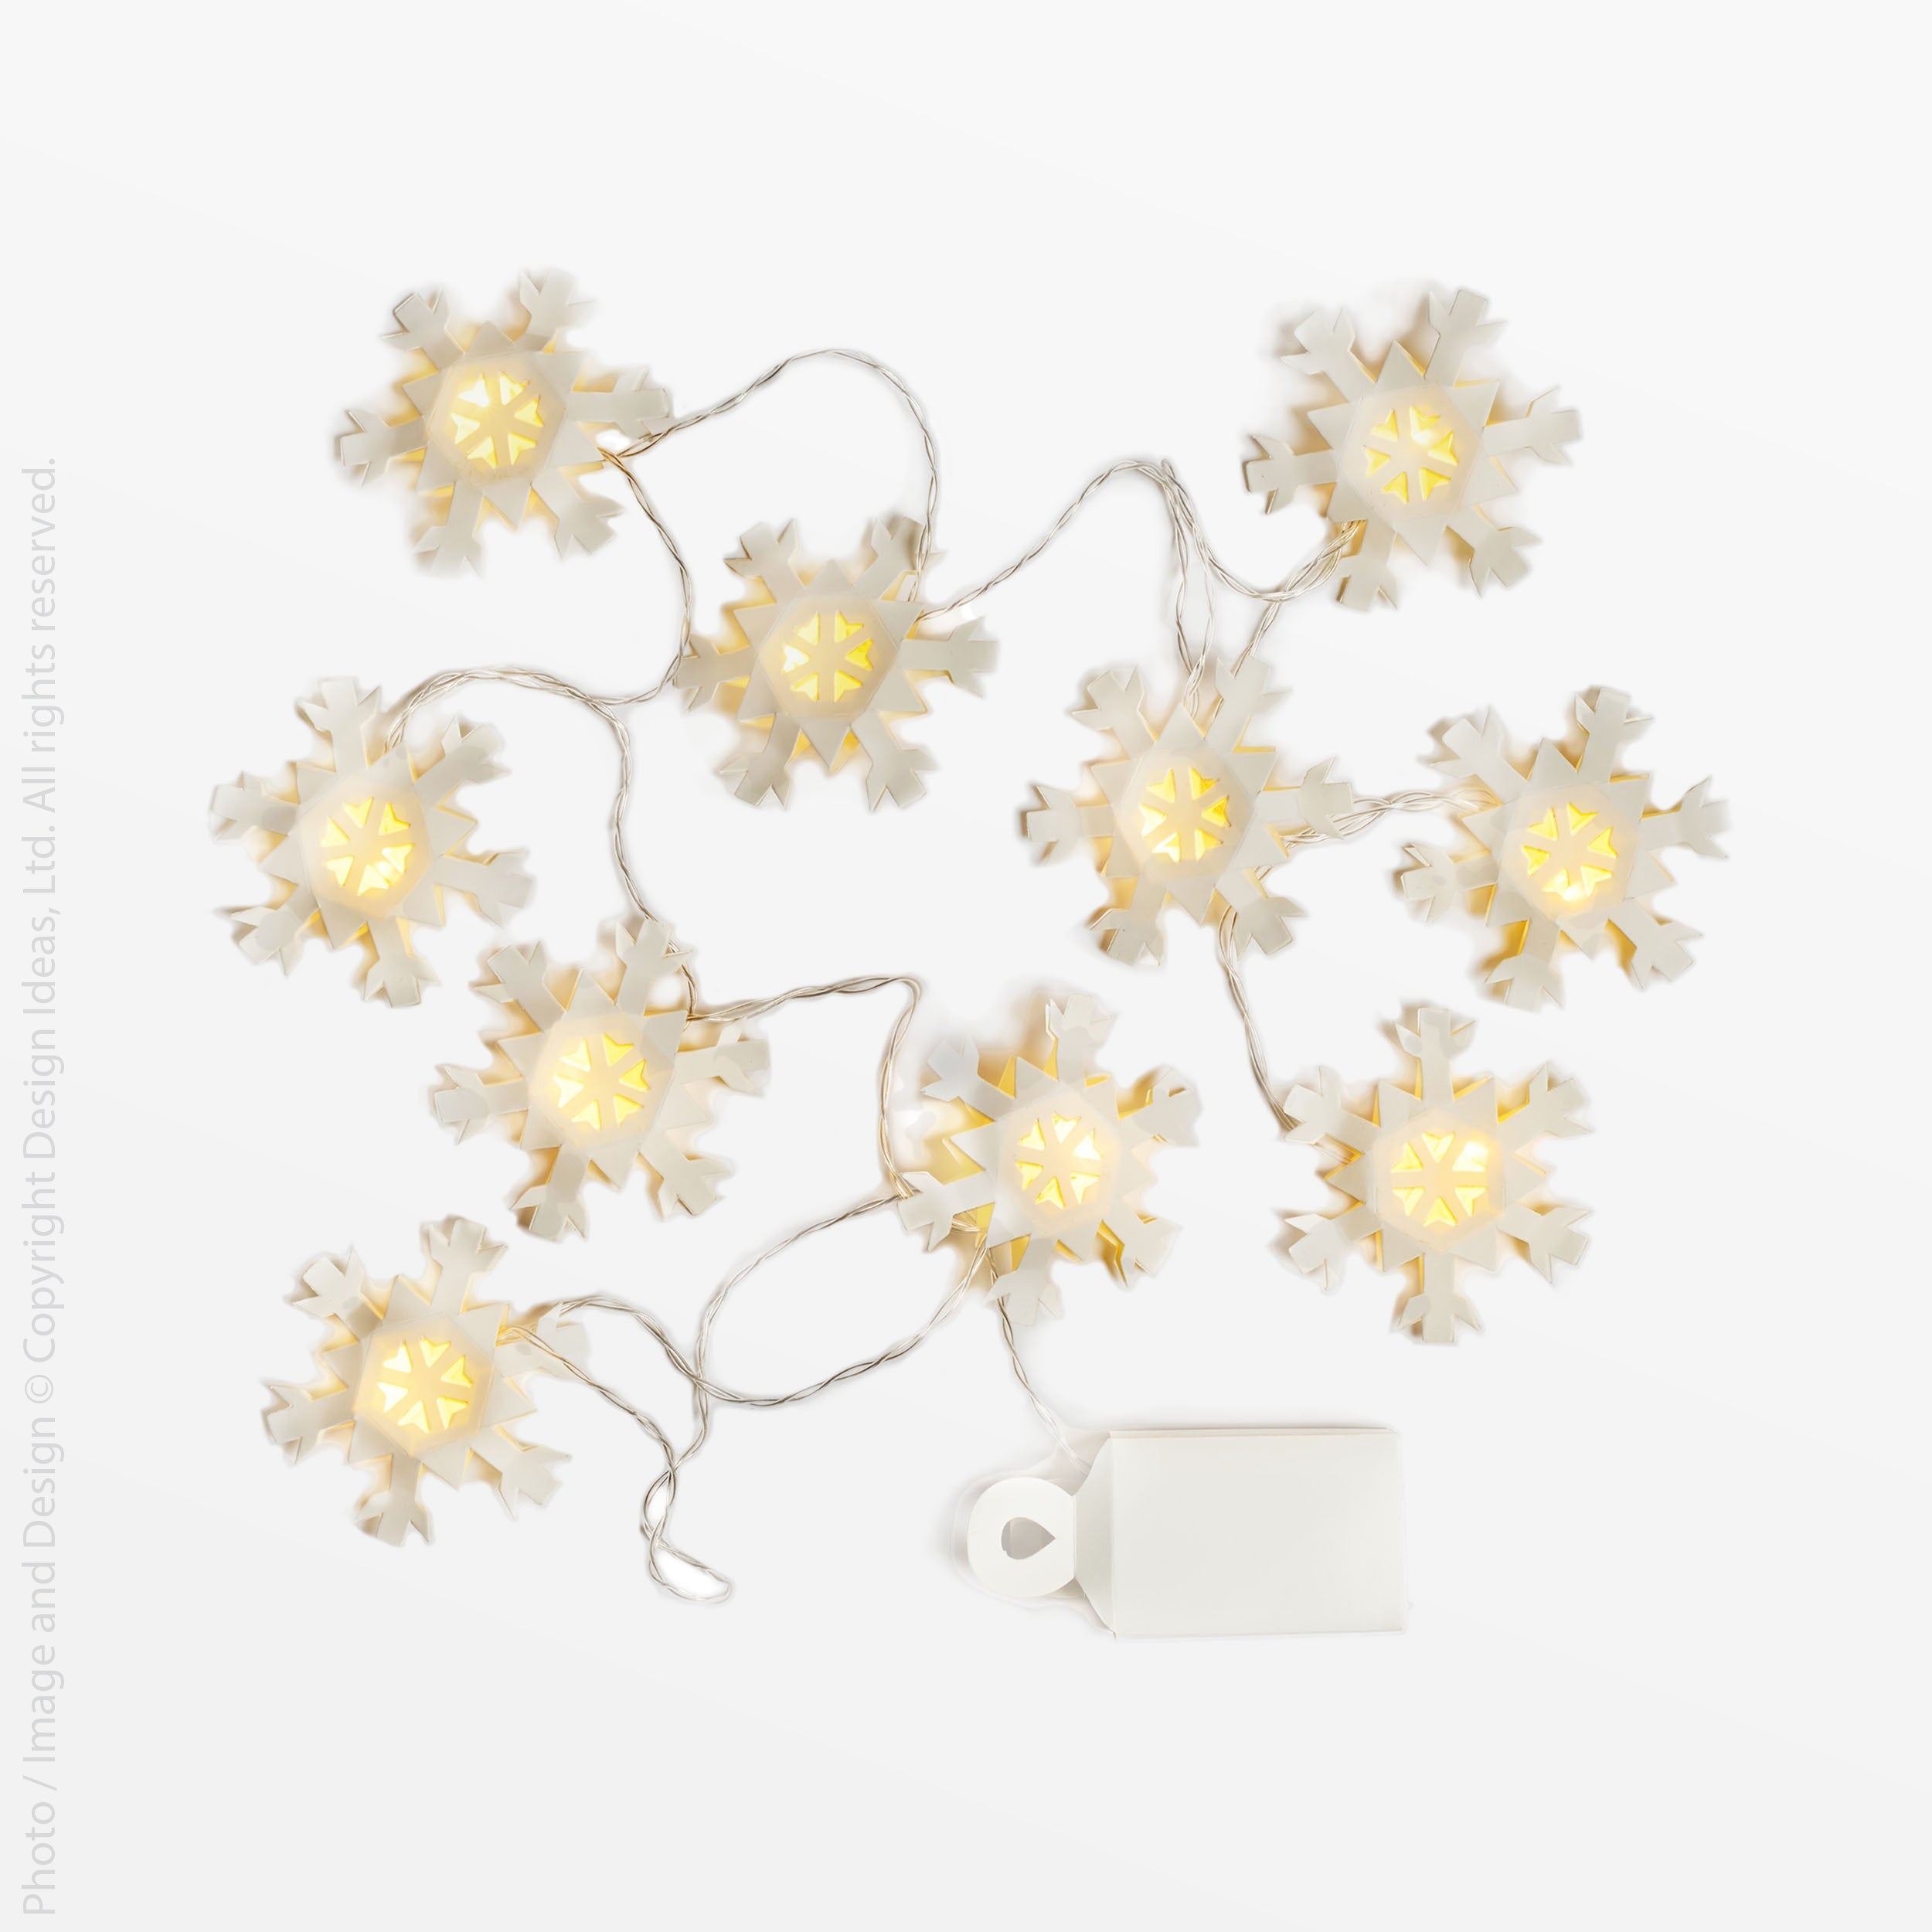 Flurry™ LED garland, snowflake - White | Image 1 | Premium Decorative from the Flurry collection | made with Paper, LED lights for long lasting use | texxture